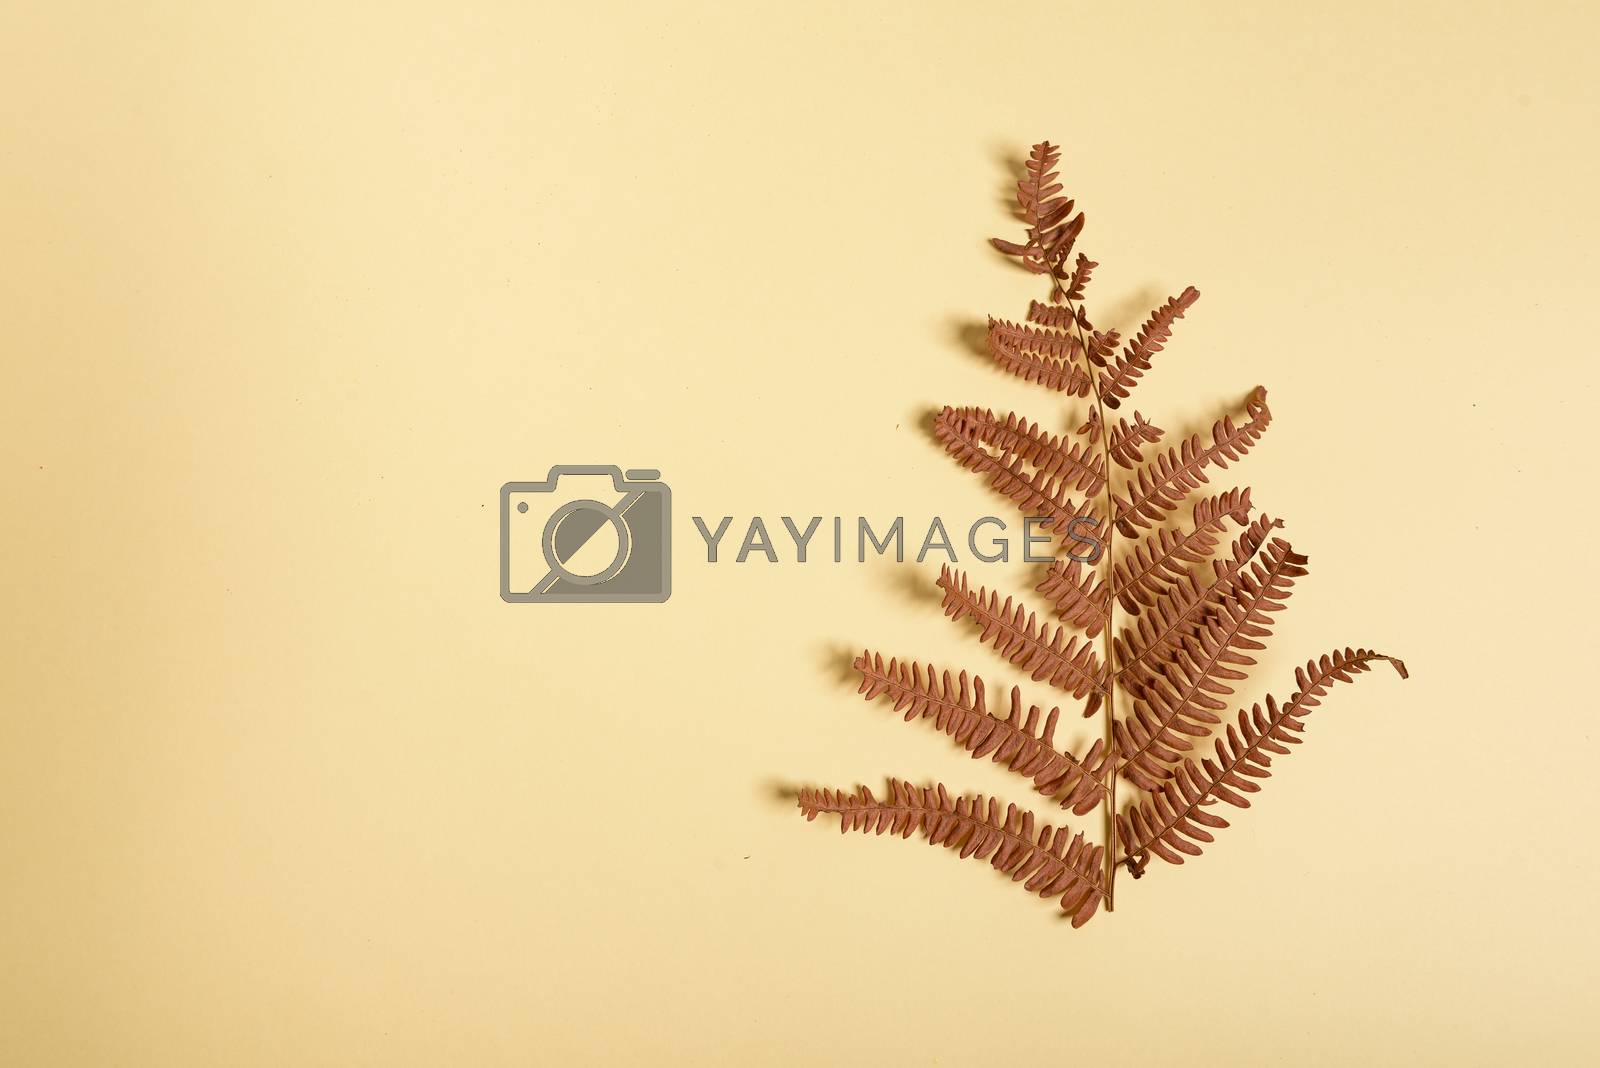 Royalty free image of Autumn fern leaves isolated on yellow background with copy space. Horizontal orienattion. Minimalistic style. by Brejeq